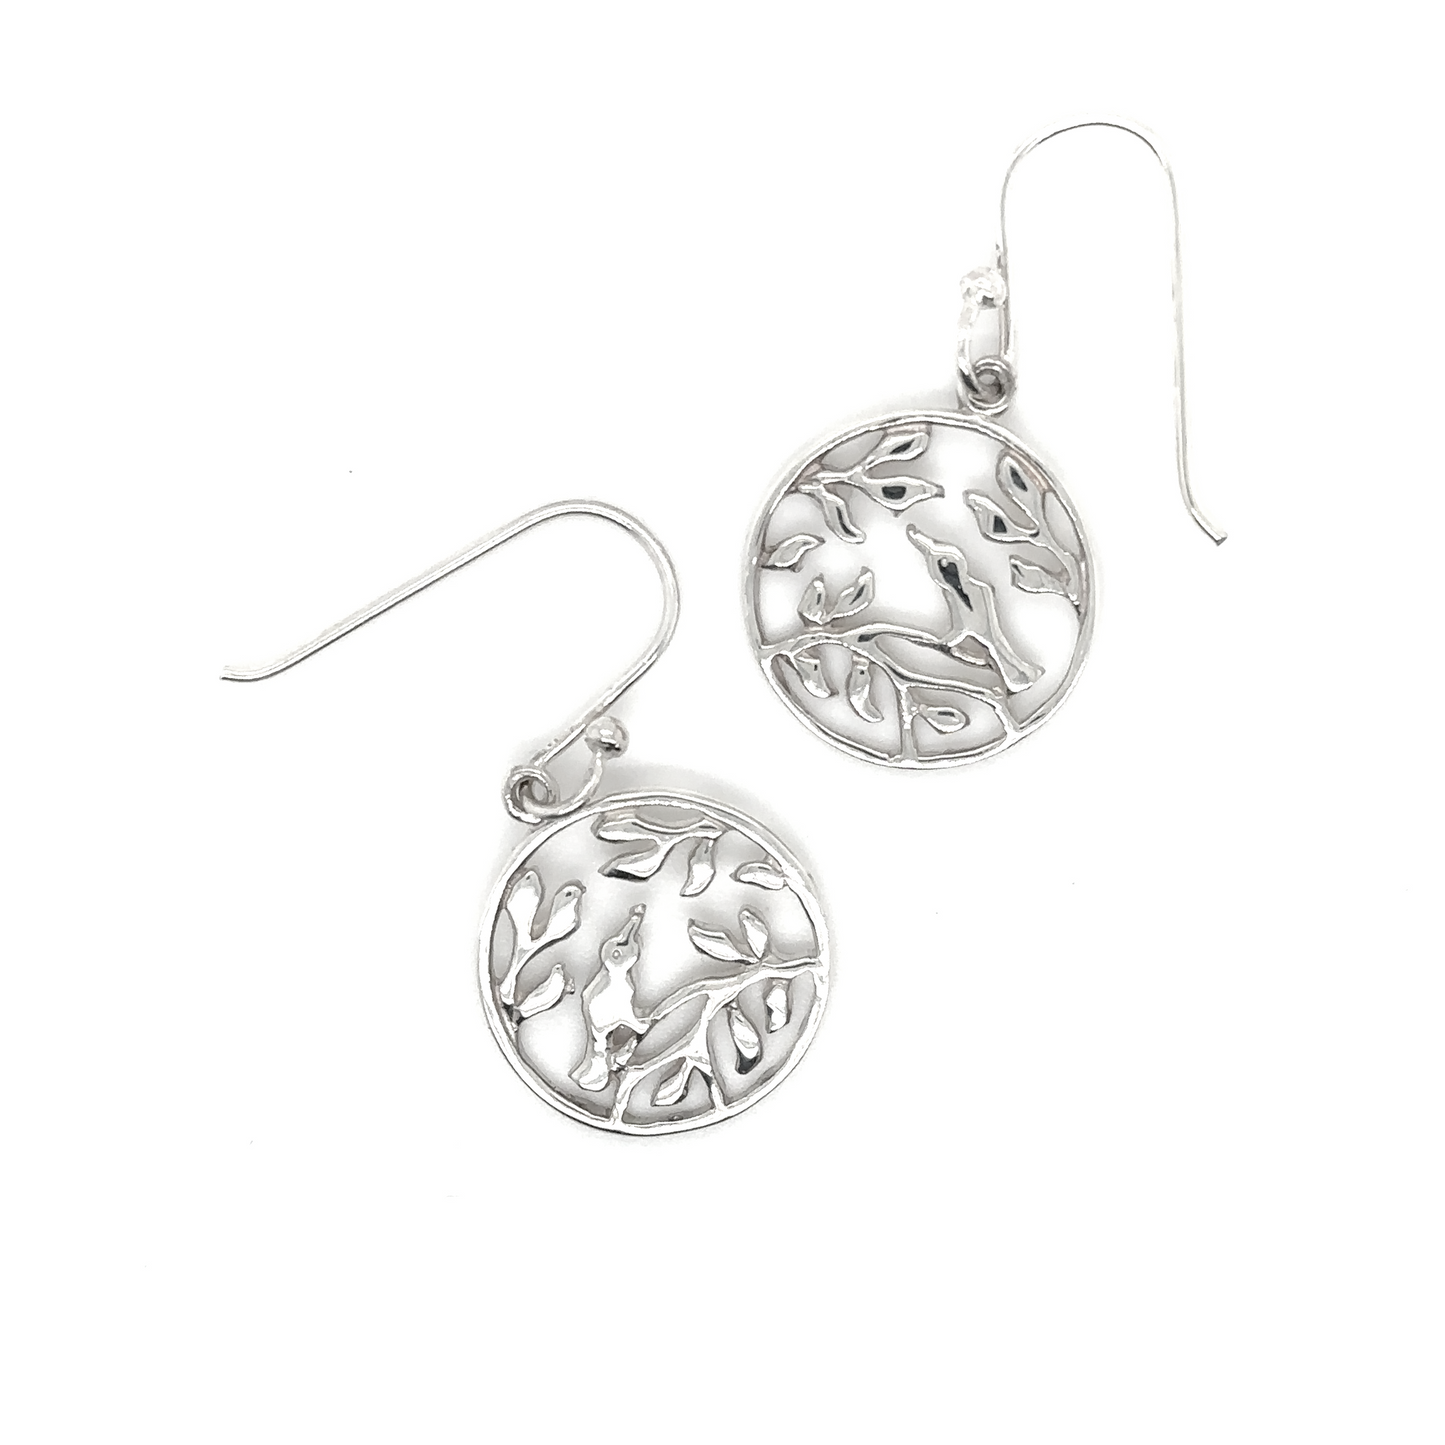 A pair of Circle Shaped Earrings with Nature Scene by Super Silver with a leaf design.